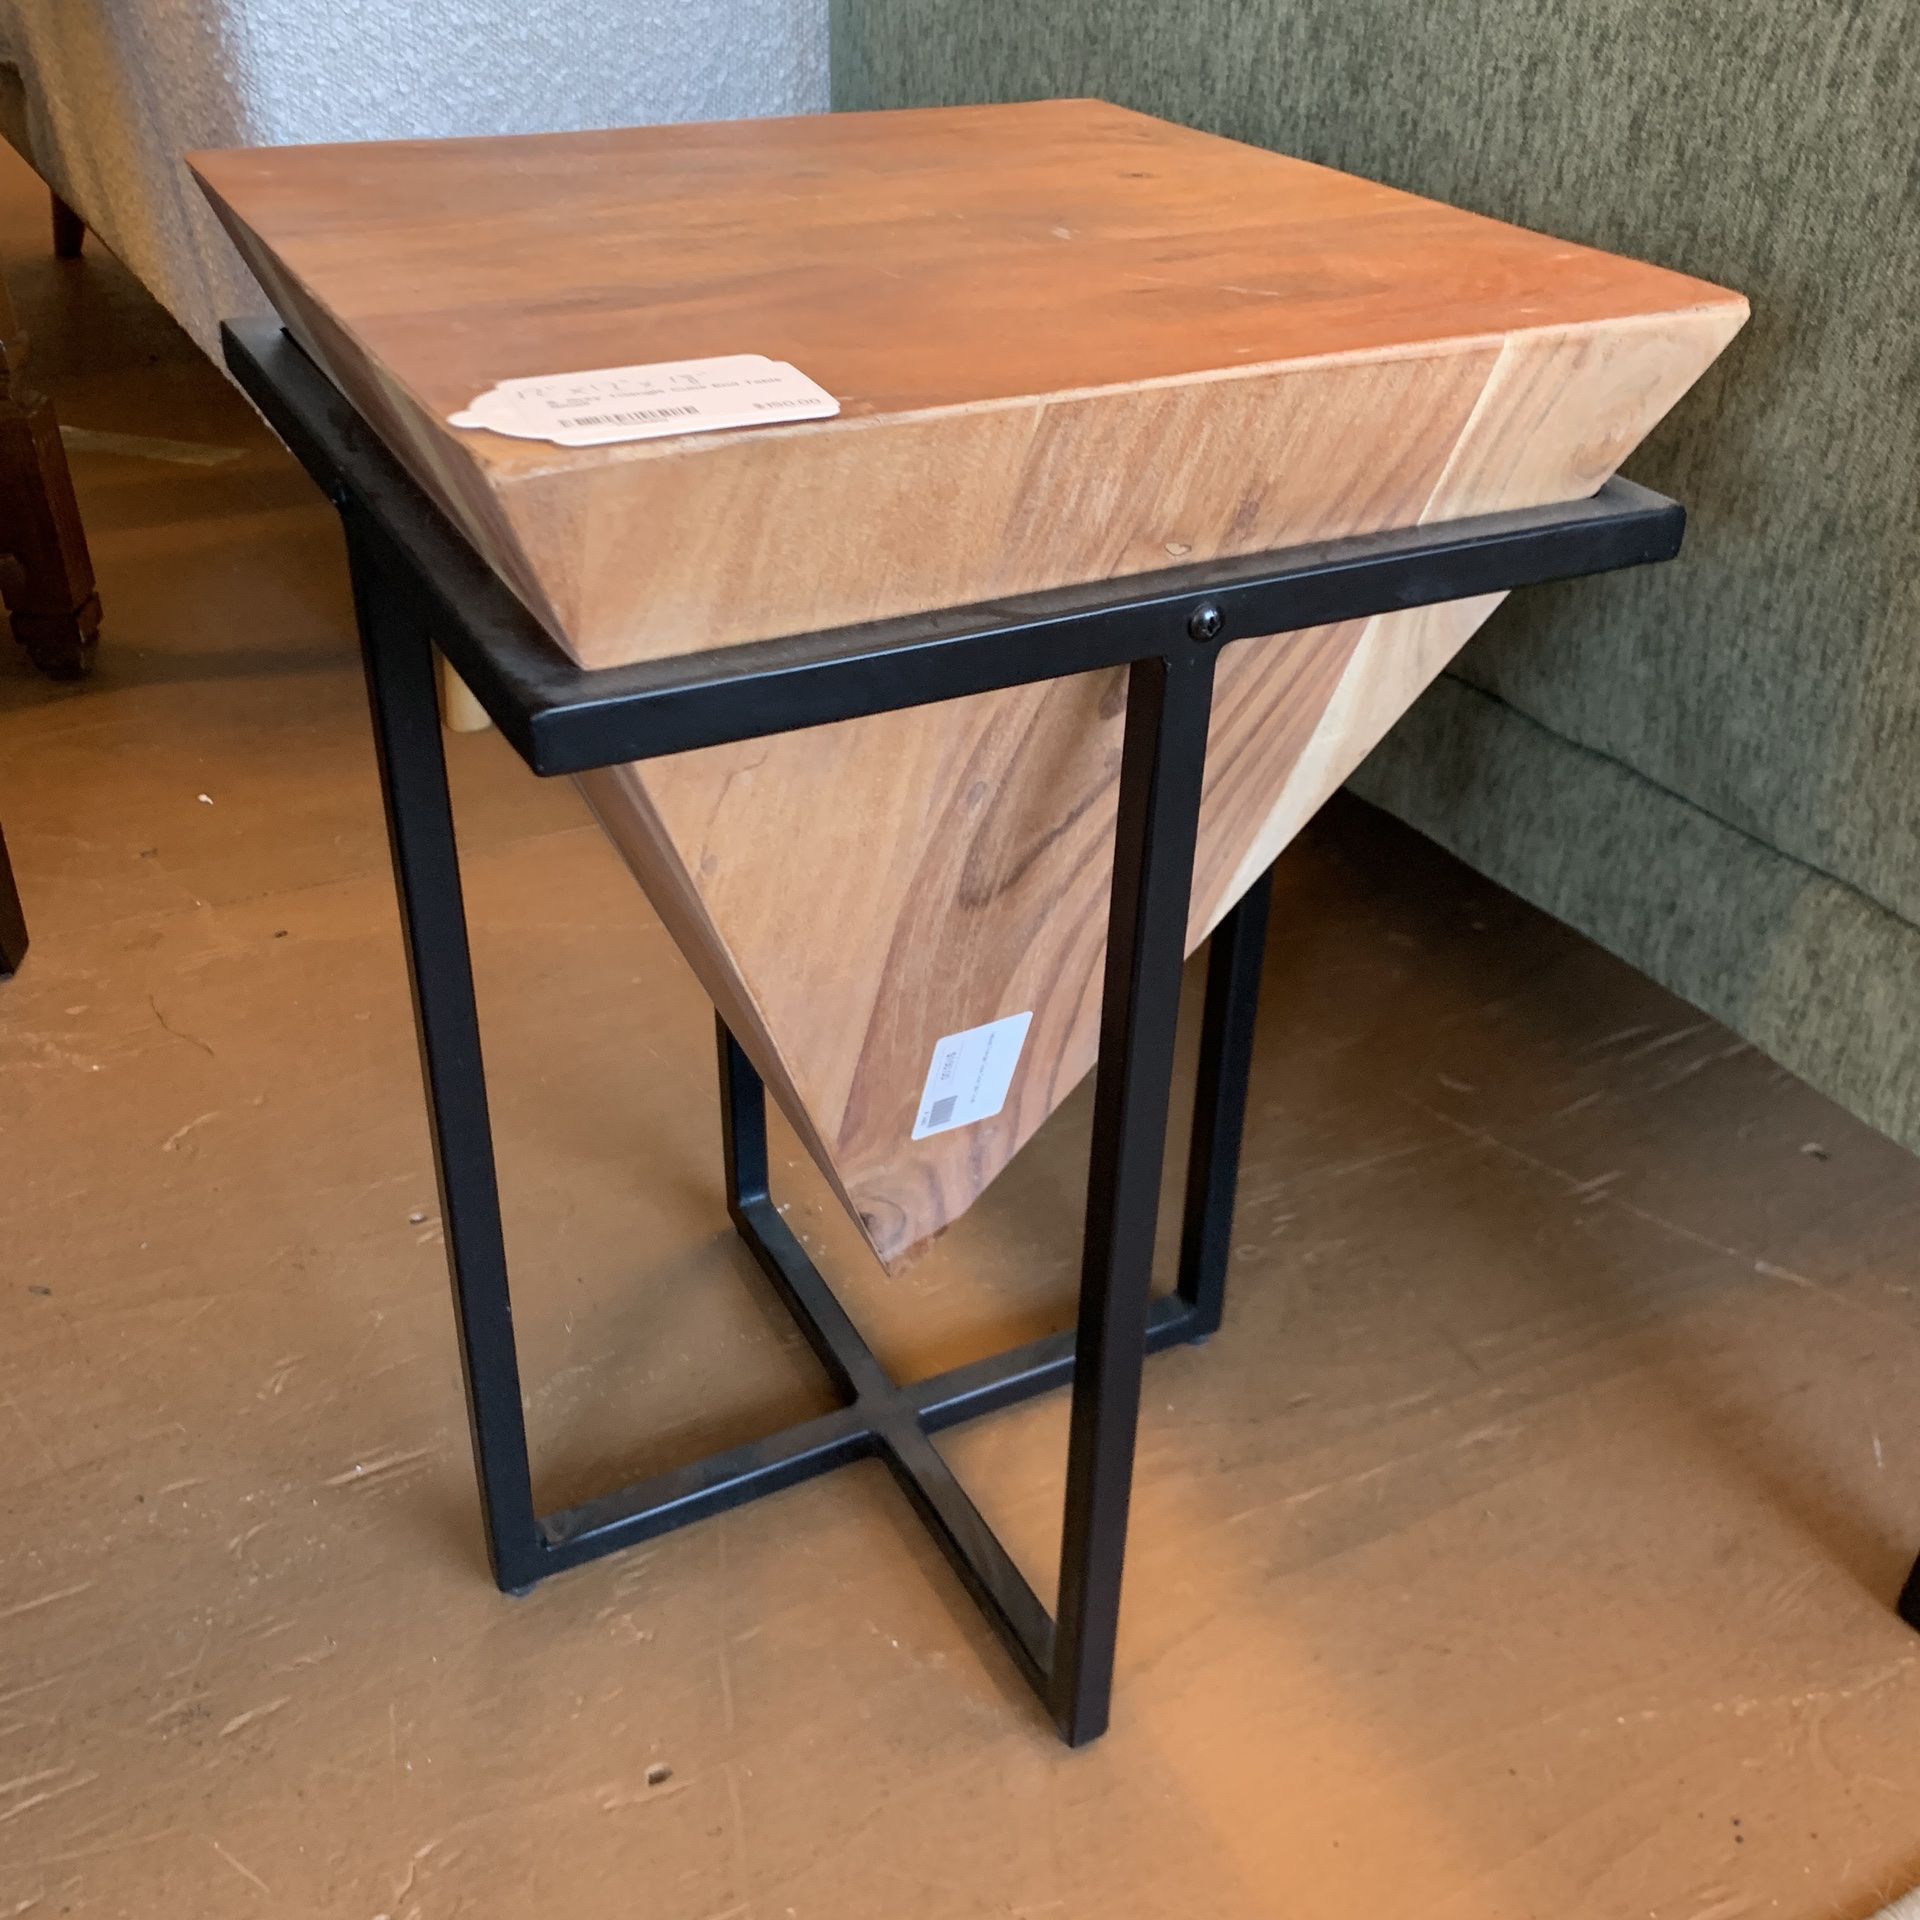 S. Grey Triangle Cube End Table Small